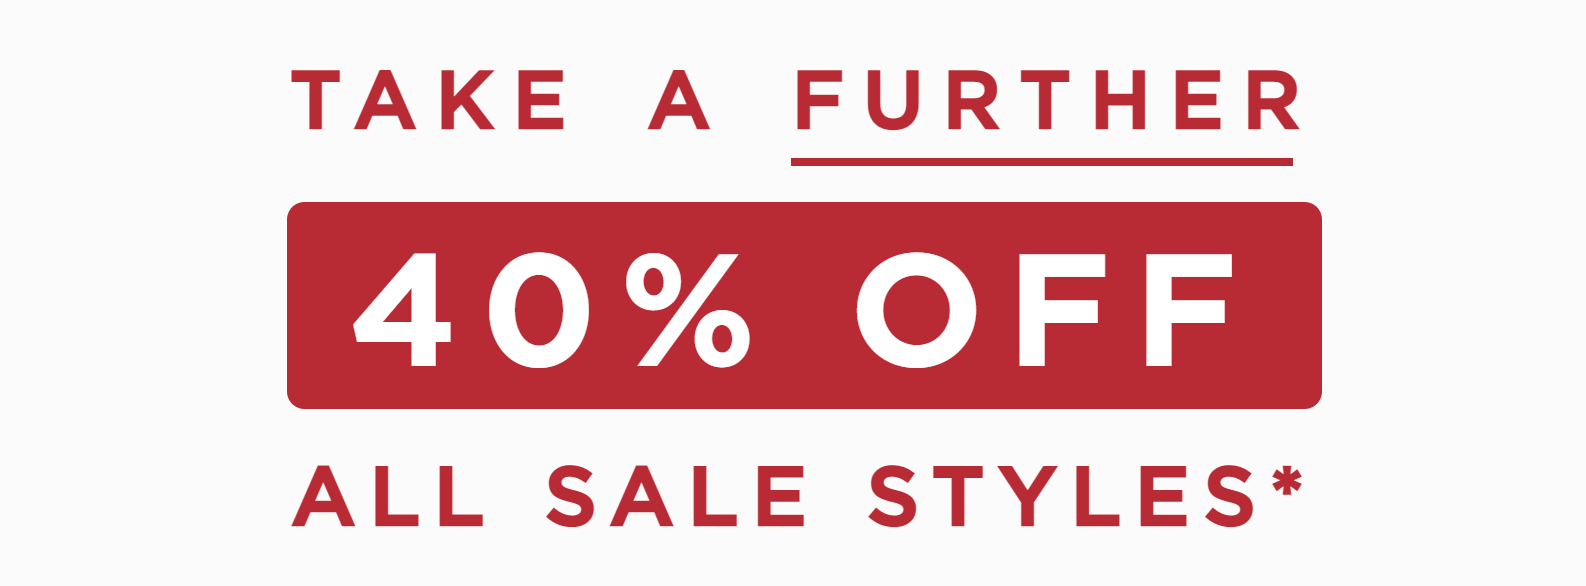 Seed Heritage Take a further 40% OFF on all sale styles from clothing & accessories